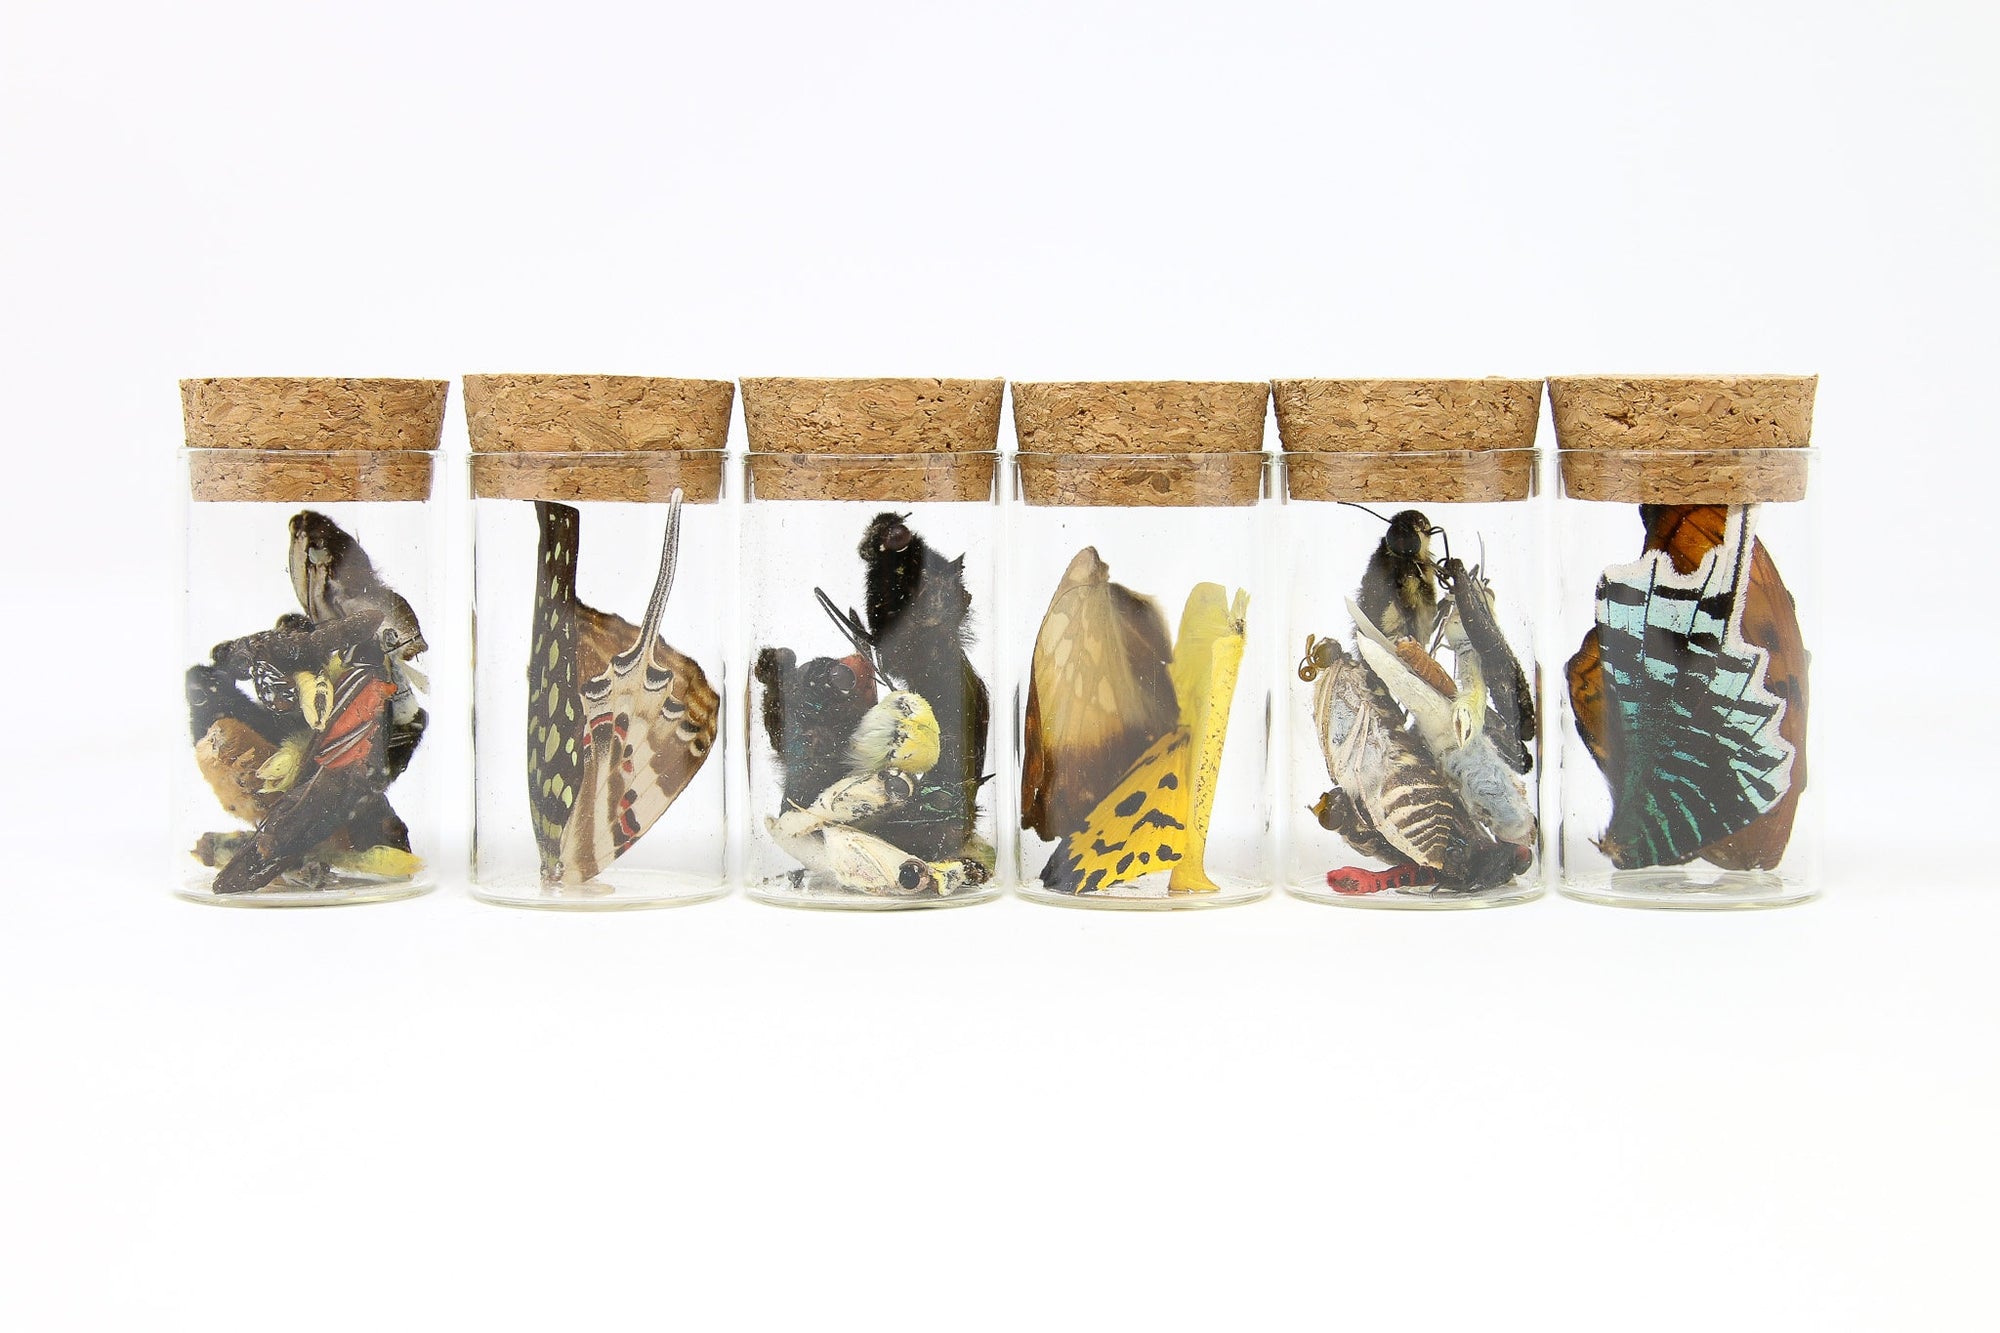 SIX (6) Glass Vials with Real Butterfly Wings and Curiosities for Artistic Creation